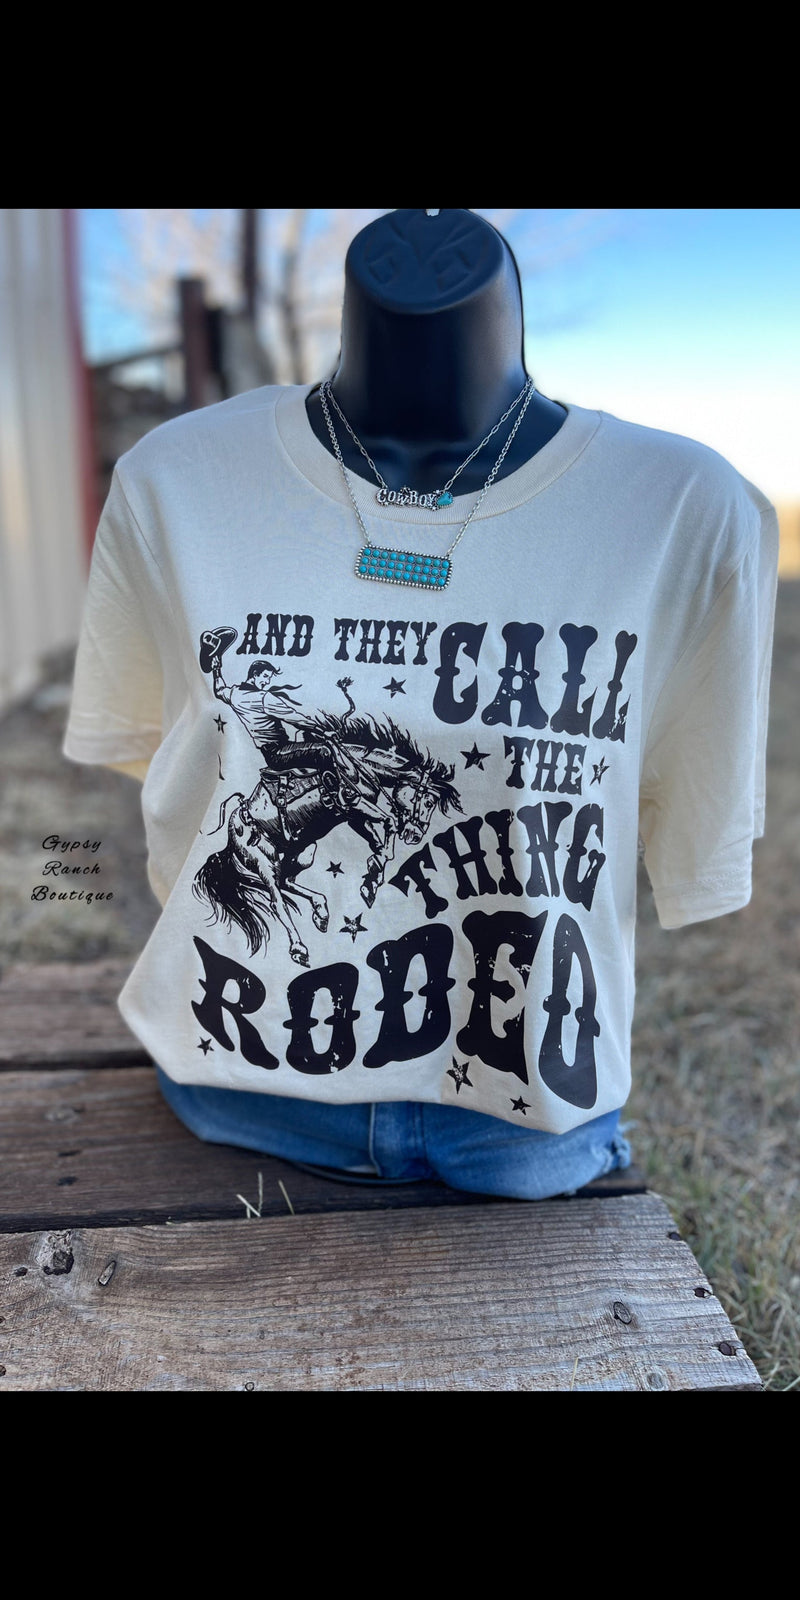 They Call the Thing Rodeo Tee on Cream - Also in Plus Size